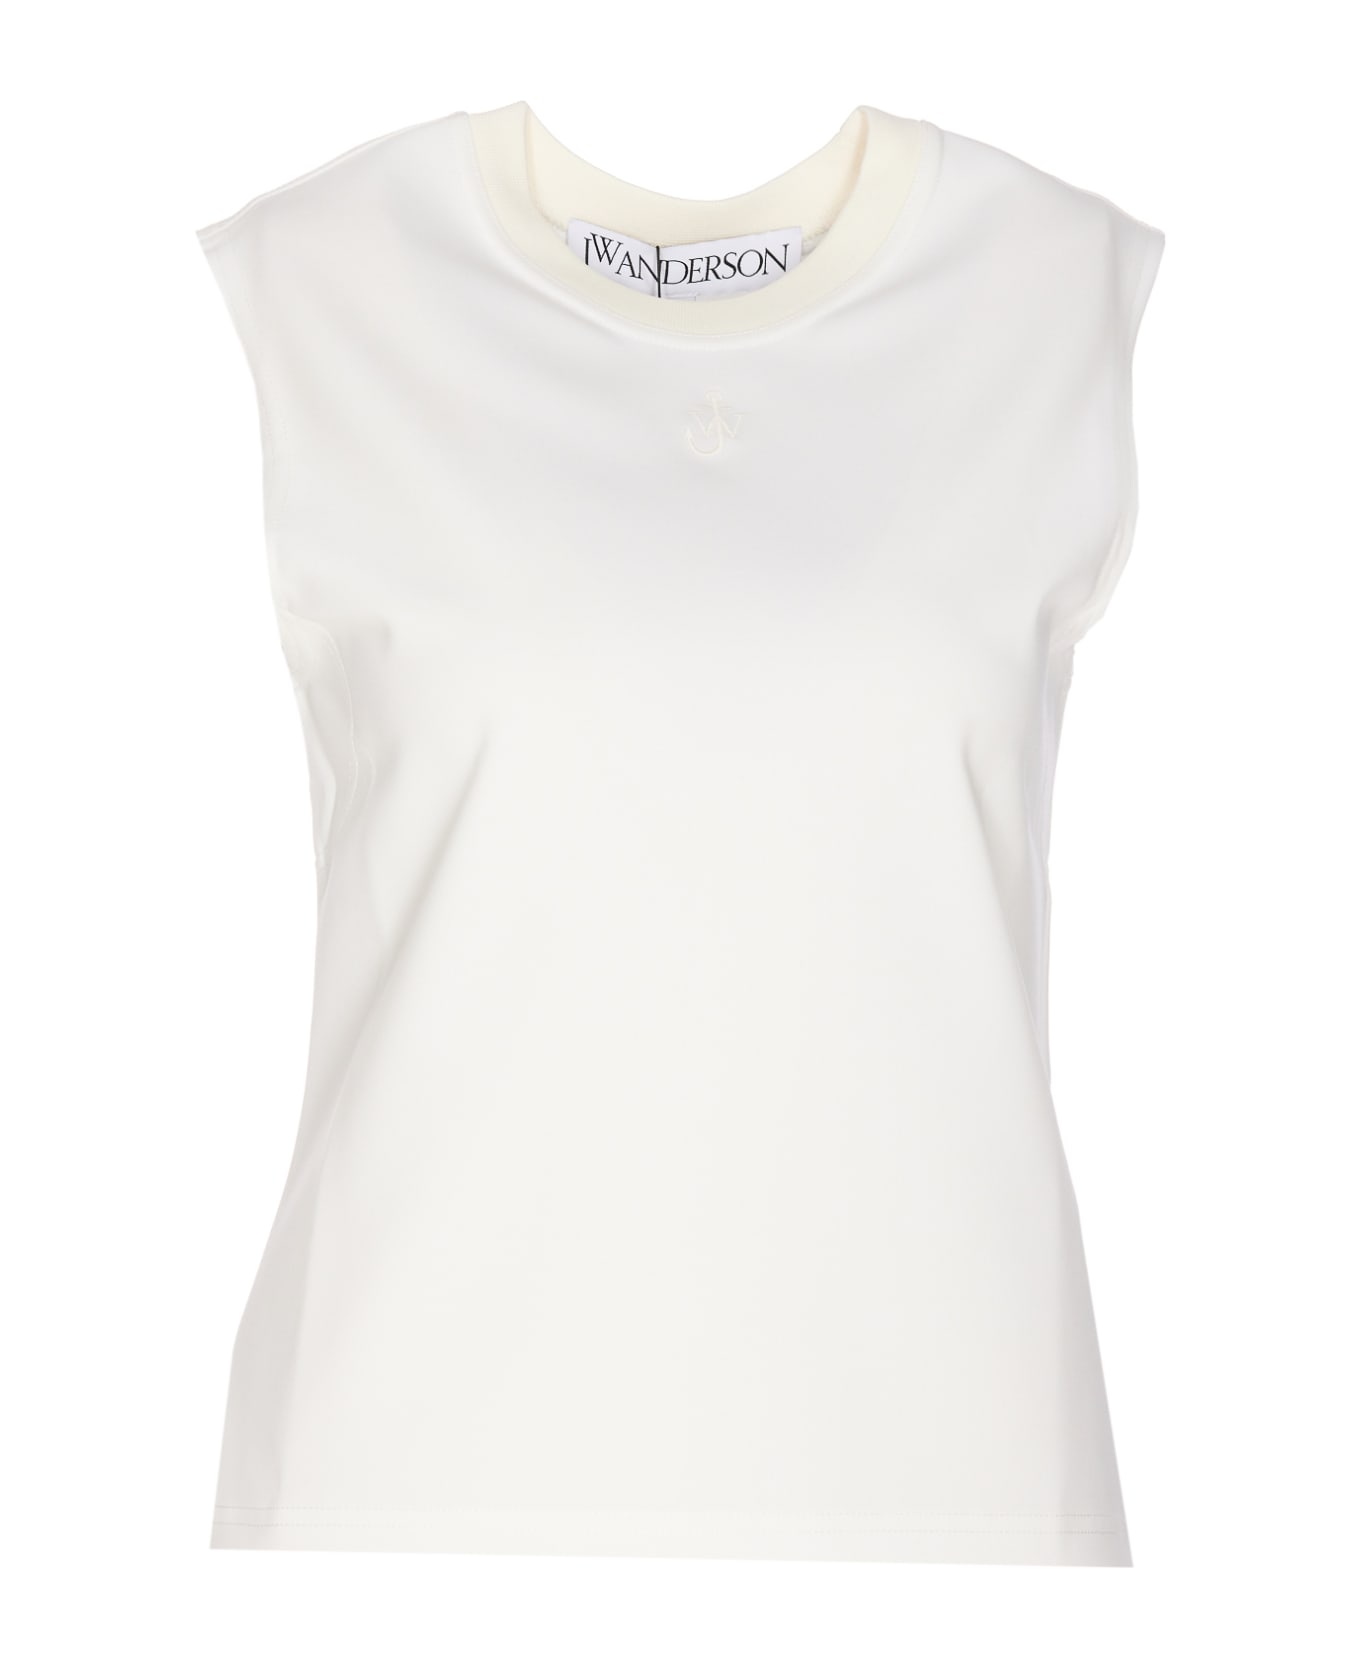 J.W. Anderson Embroidered Jwa Logo Tank Top - White タンクトップ